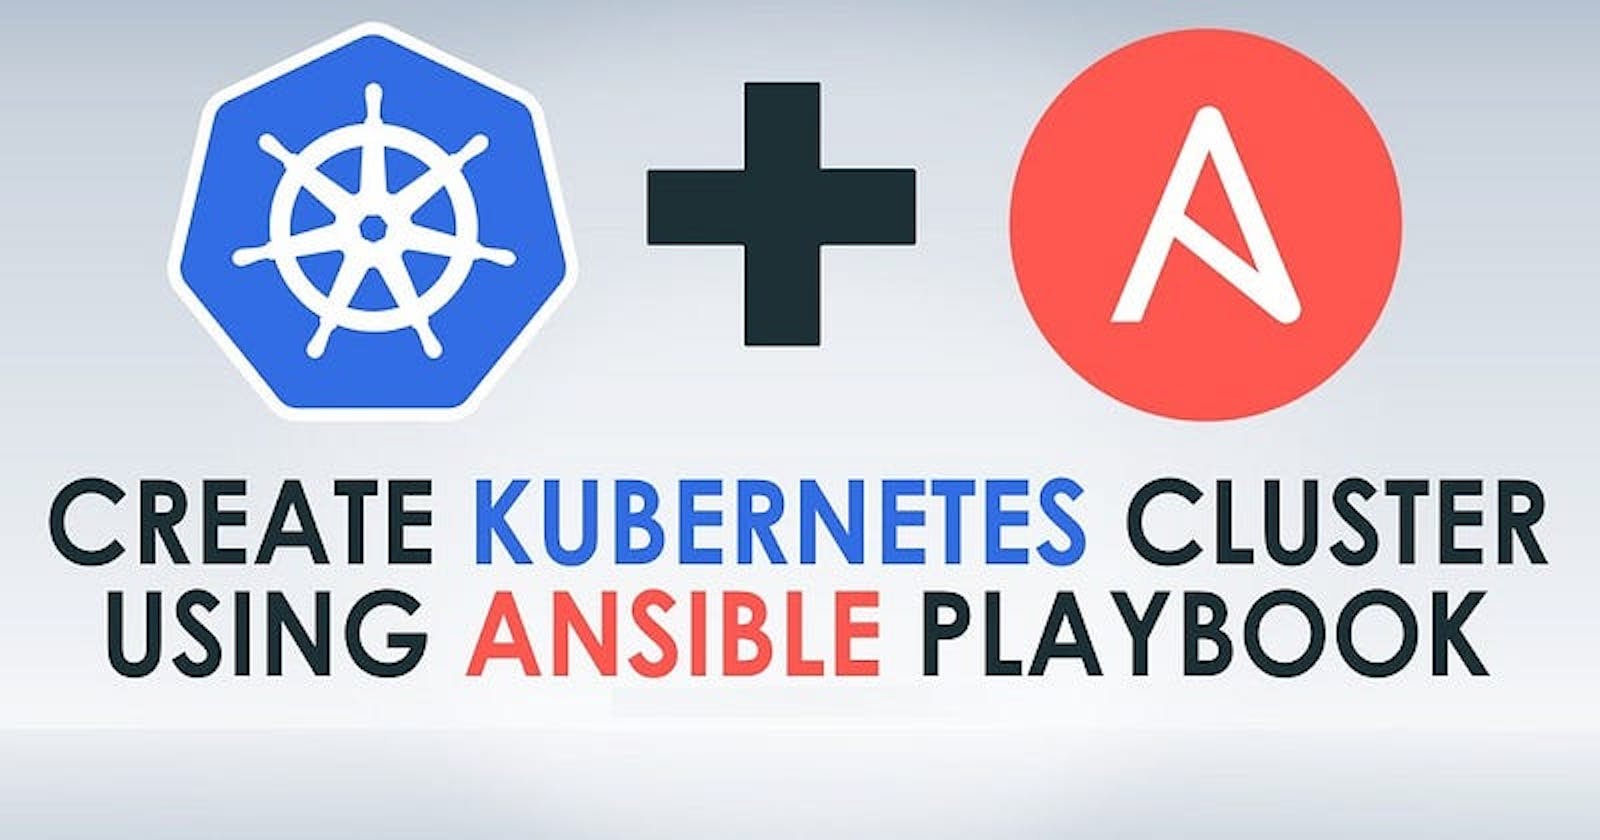 K8s & Ansible: Deploying a K8s Cluster using Ansible